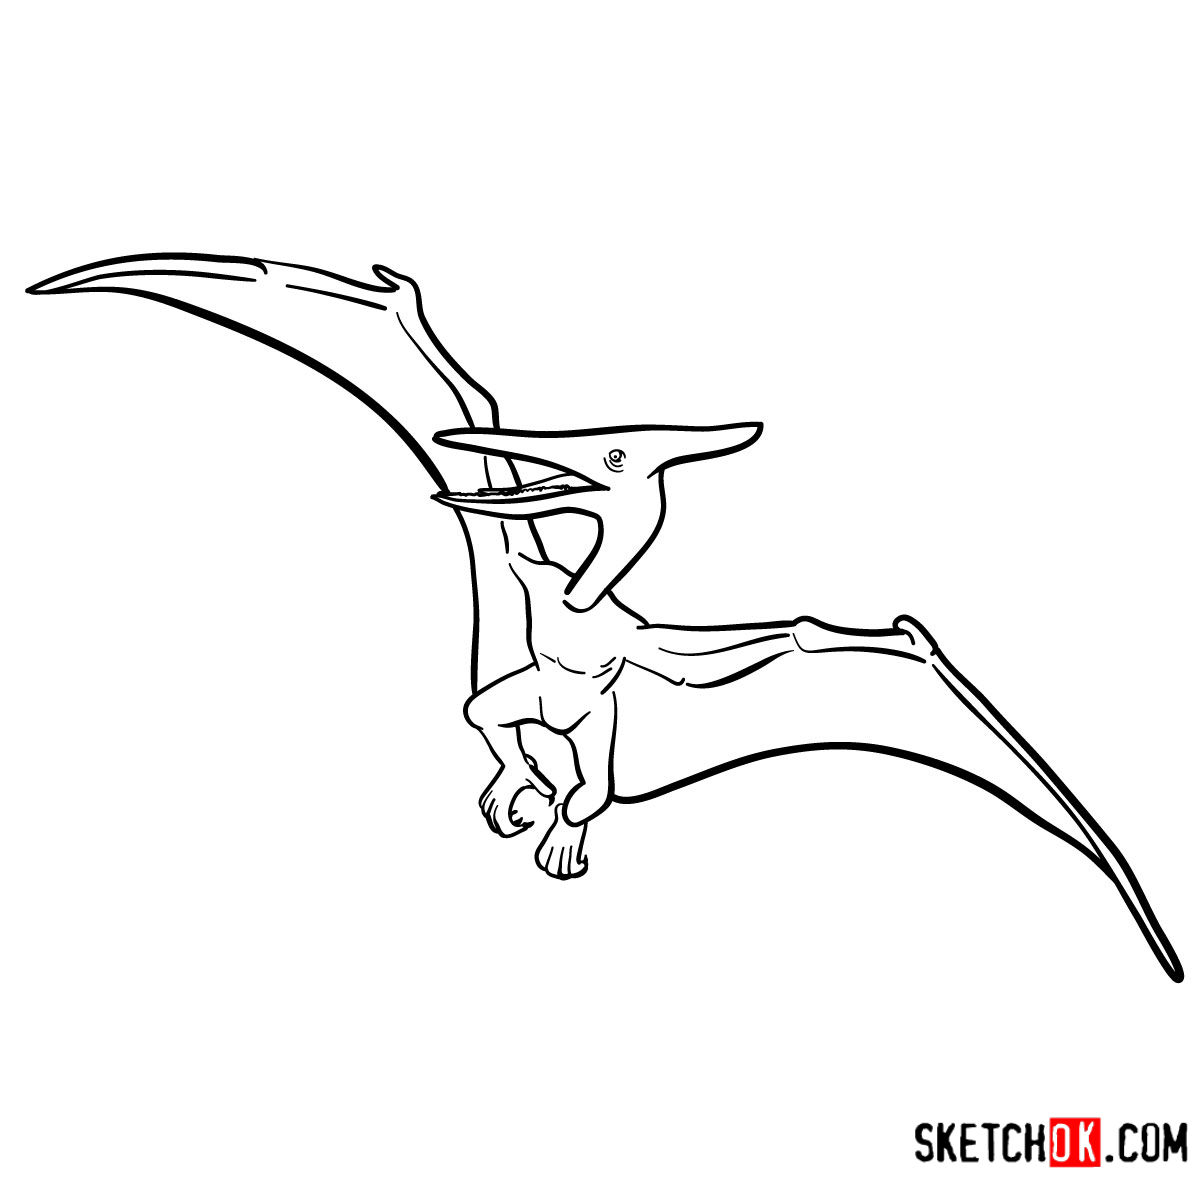 How to draw a Pterodactylus